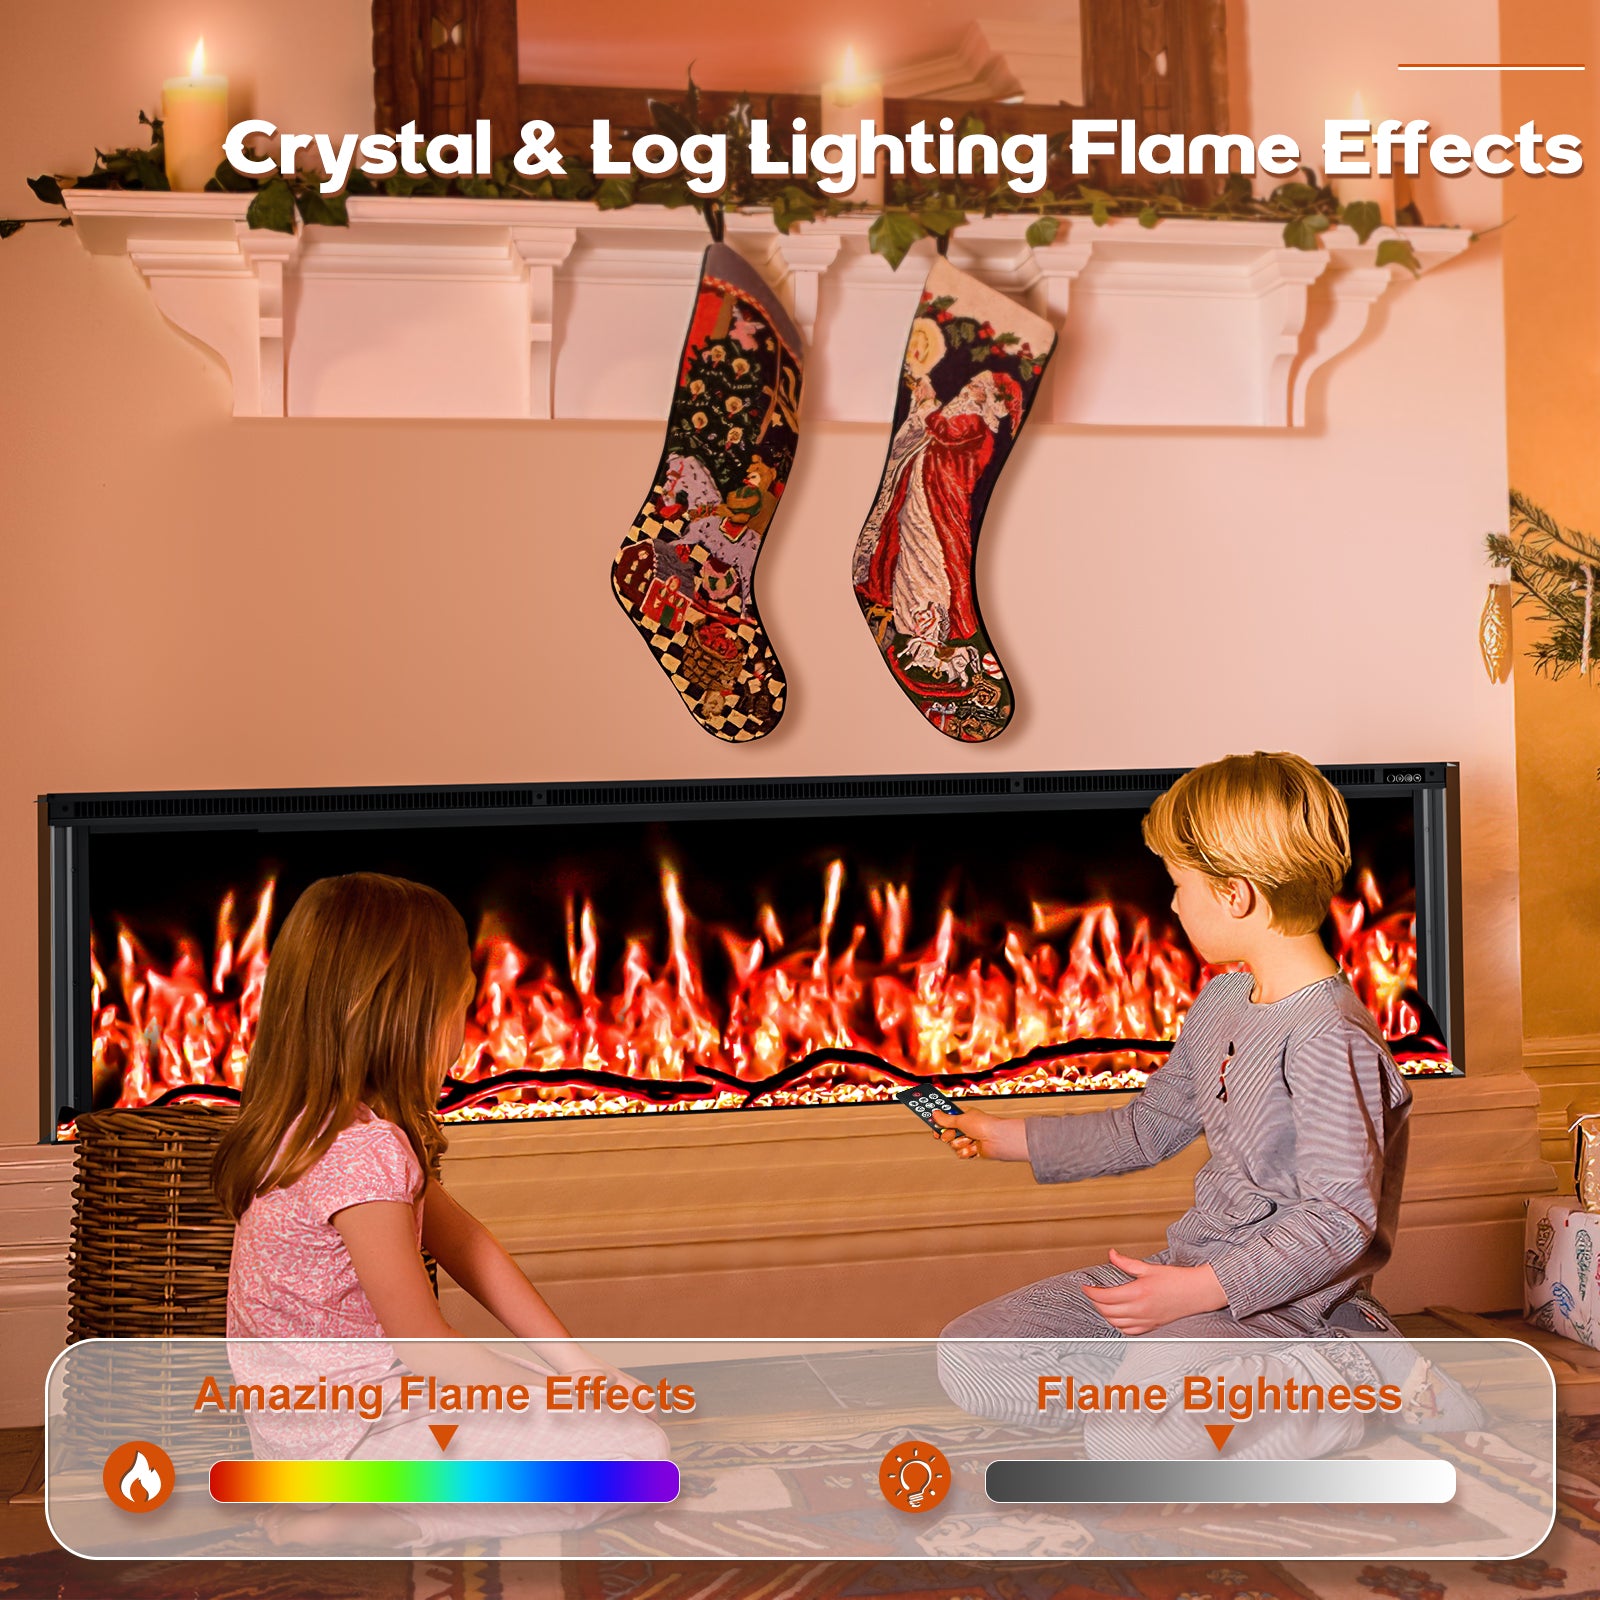 Inserts 3-Sided Electric Fireplace 50-inch Long Modern Eletric Fire Place Space Heater for Indoor Living Room Bedroom Use, Realistic Led Flame Color with Remote Control, Log & Crystals, Black